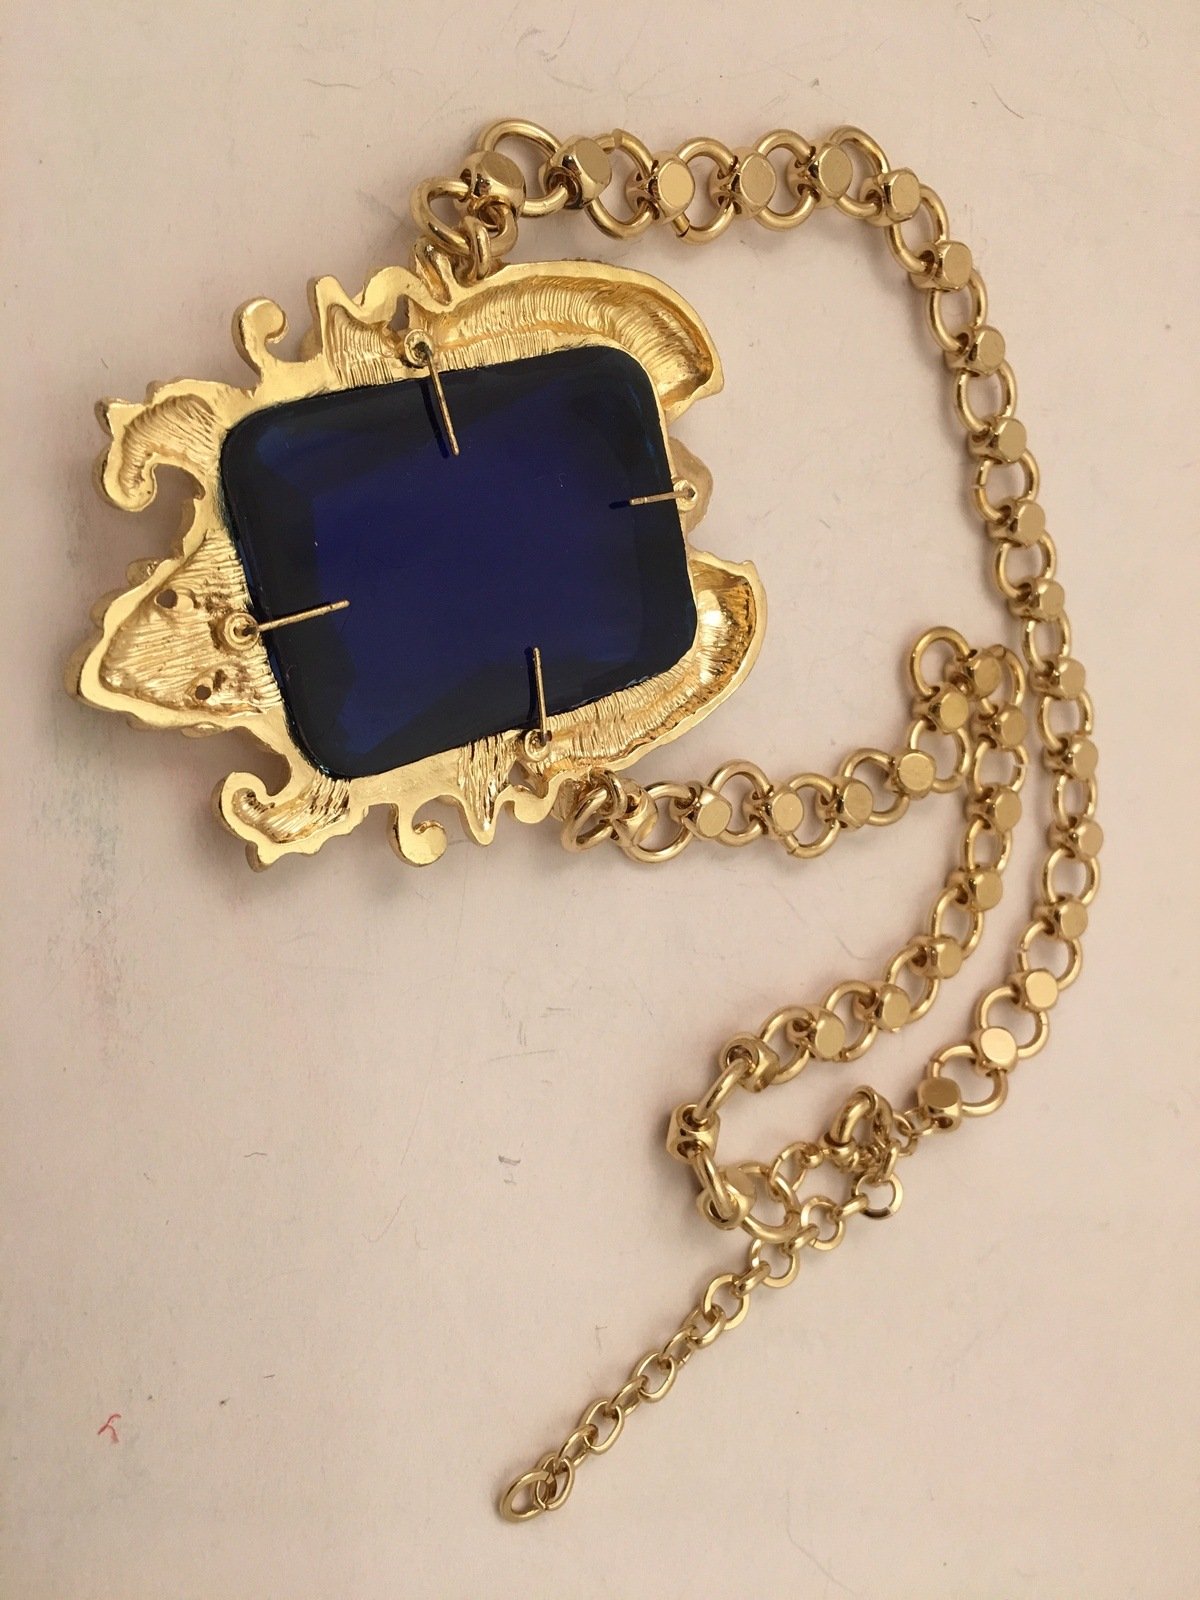 Massive Blue Pendant with Zebras Golden Chain Necklace Jewelry